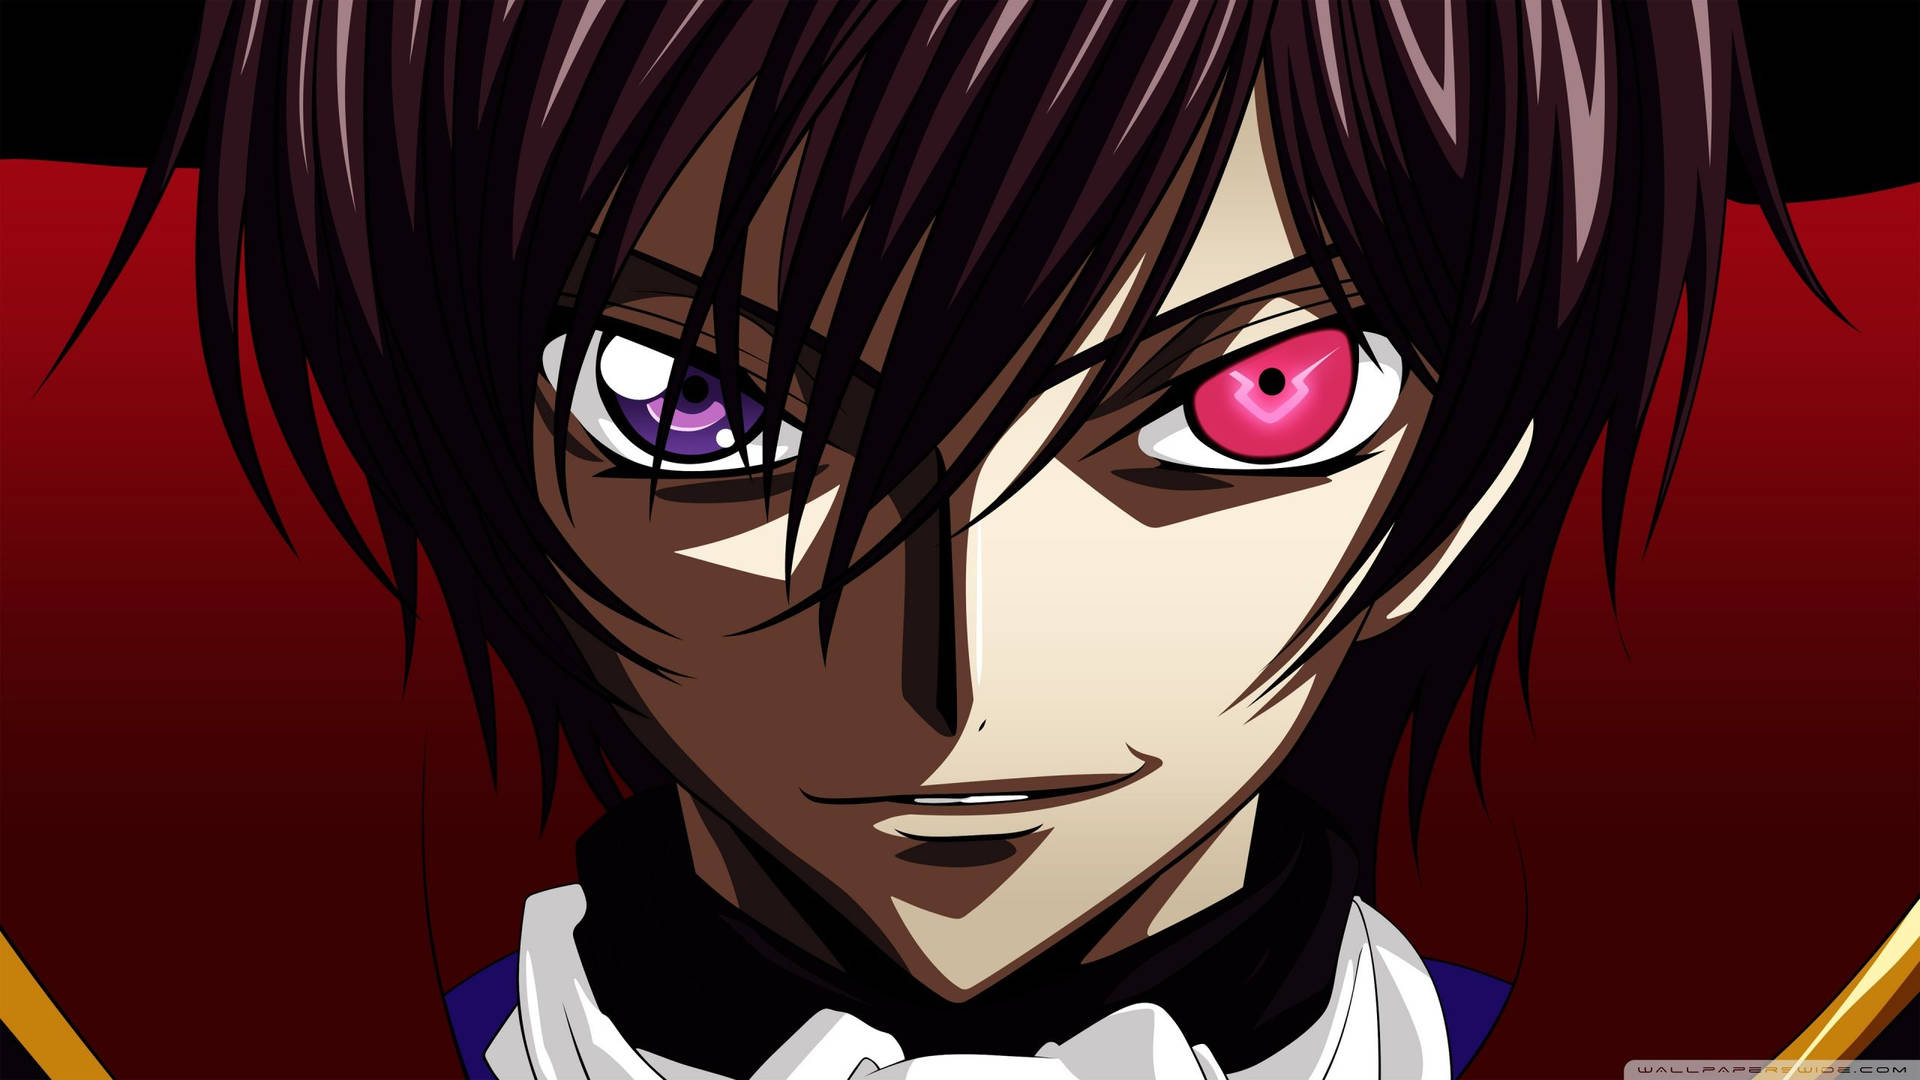 Lelouch Vi Britannia, standing ready to take on the world. Wallpaper